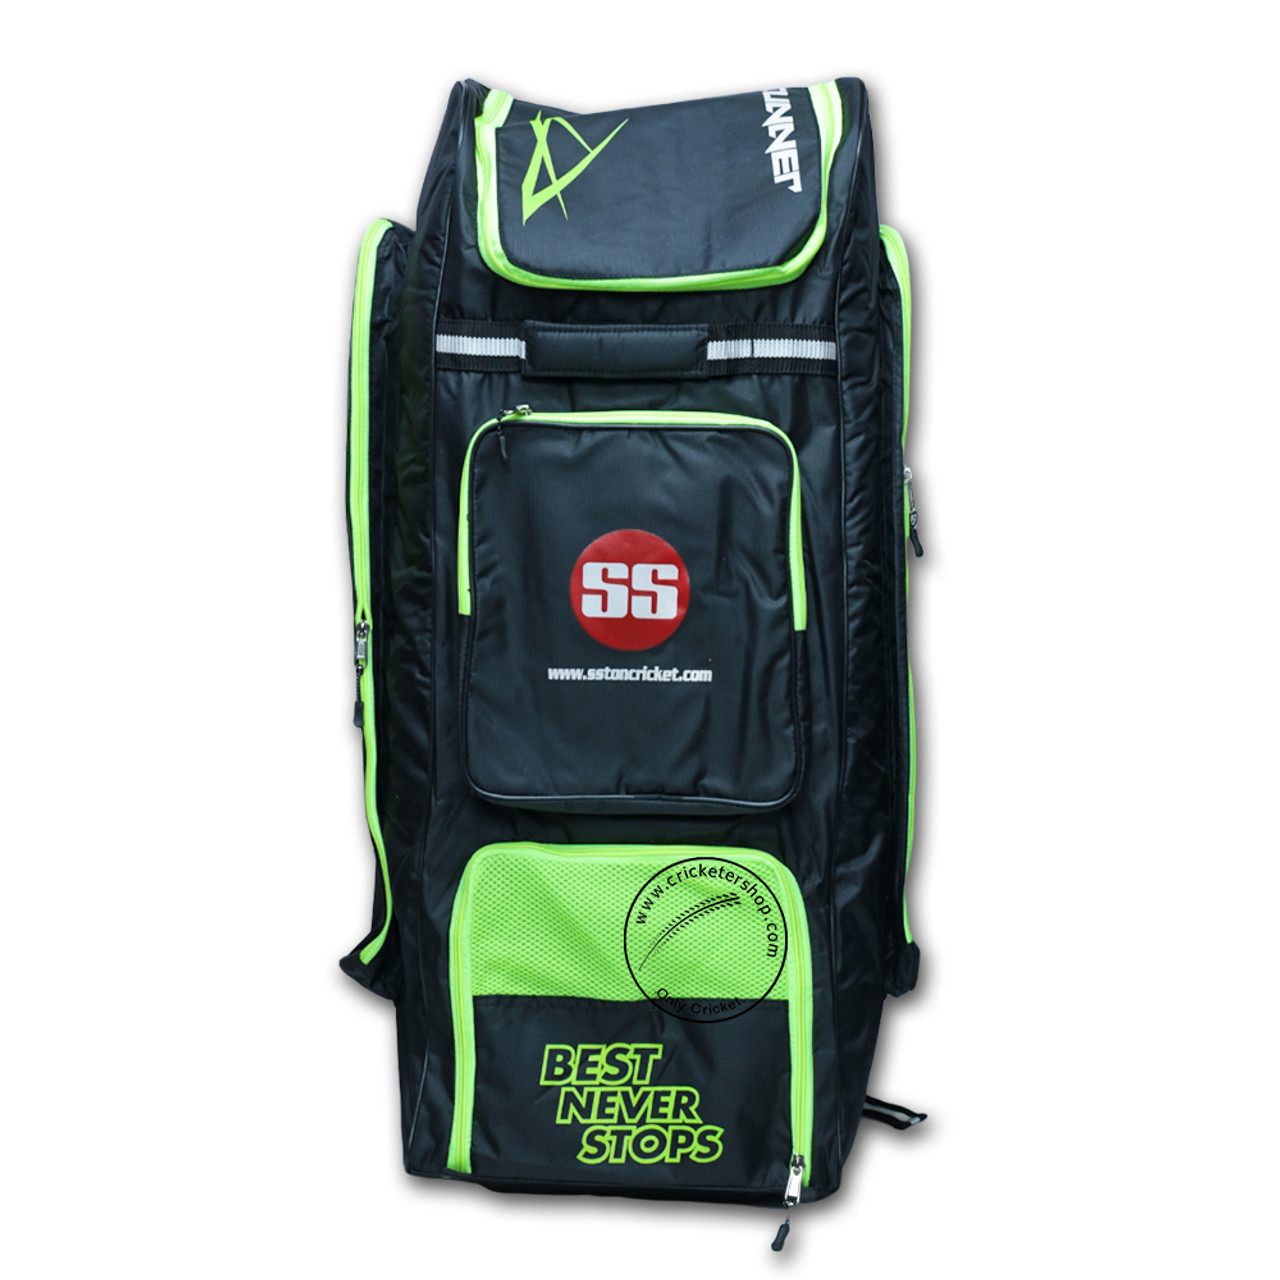 Buy GM 808 5 Star Back Pack Online India| GM Cricket Bags